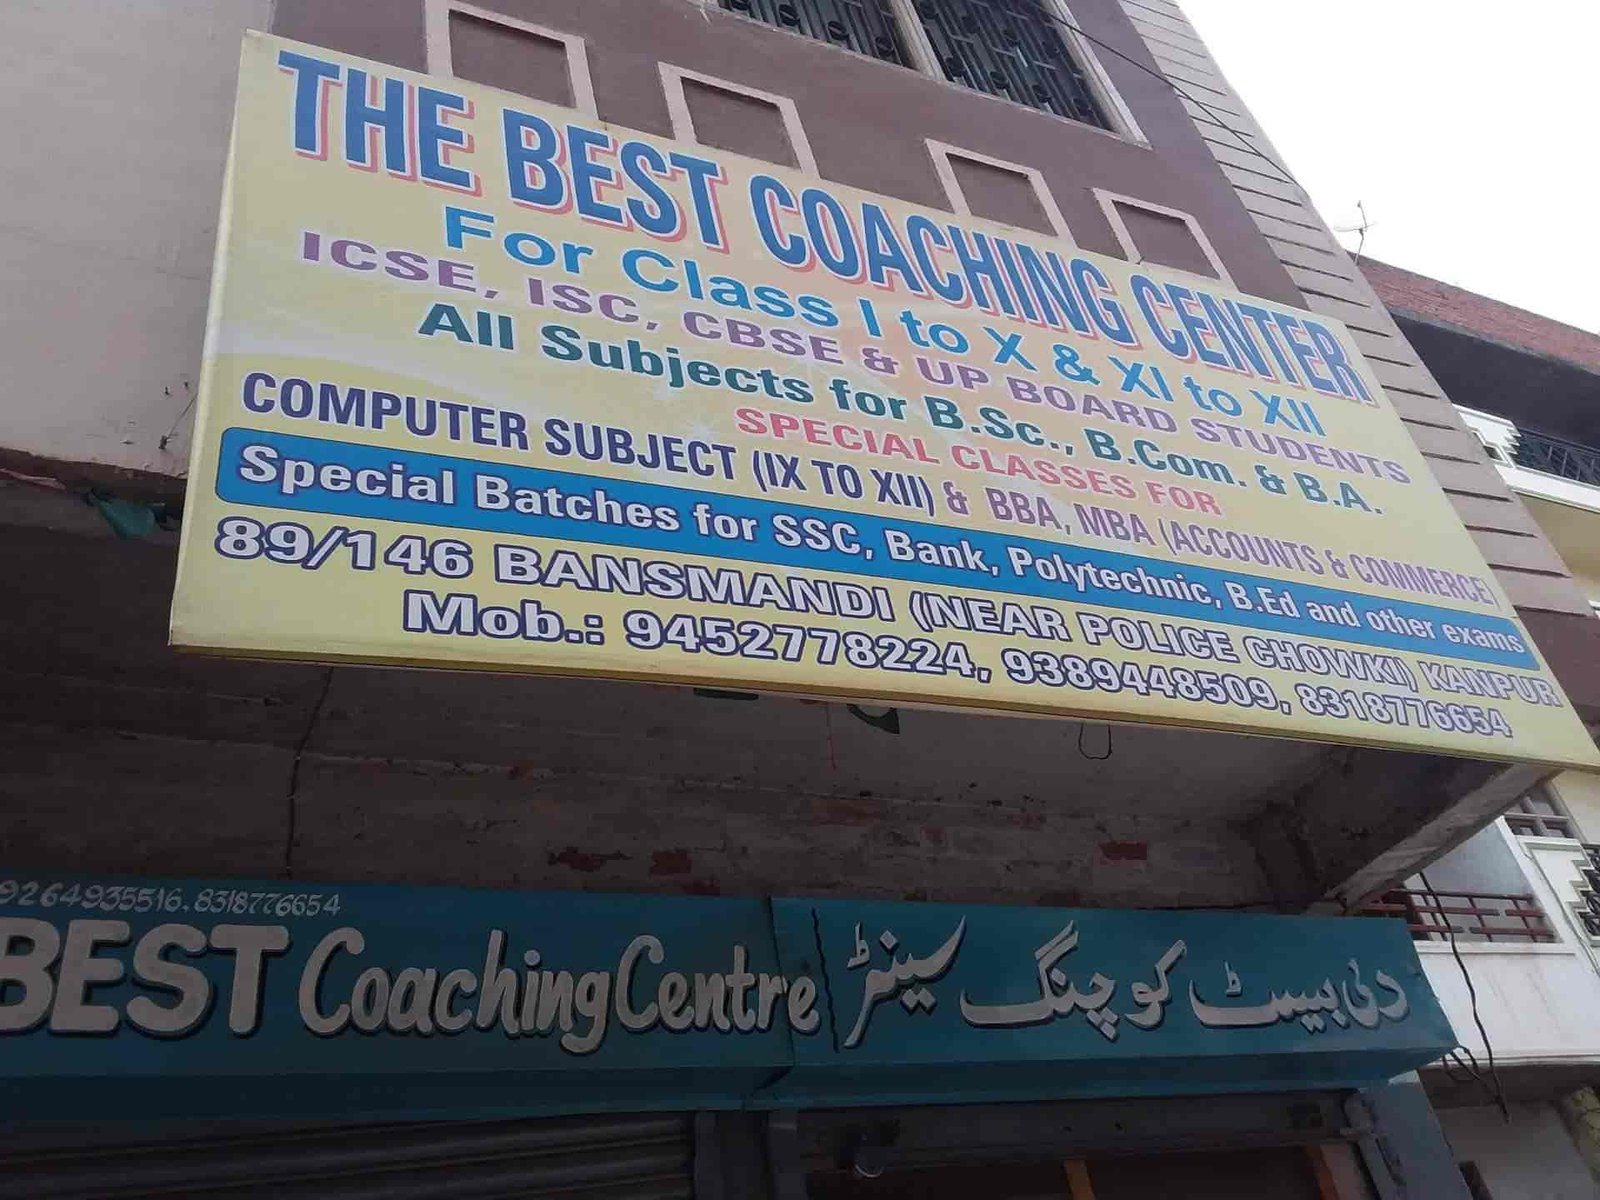 The Best Coaching Center